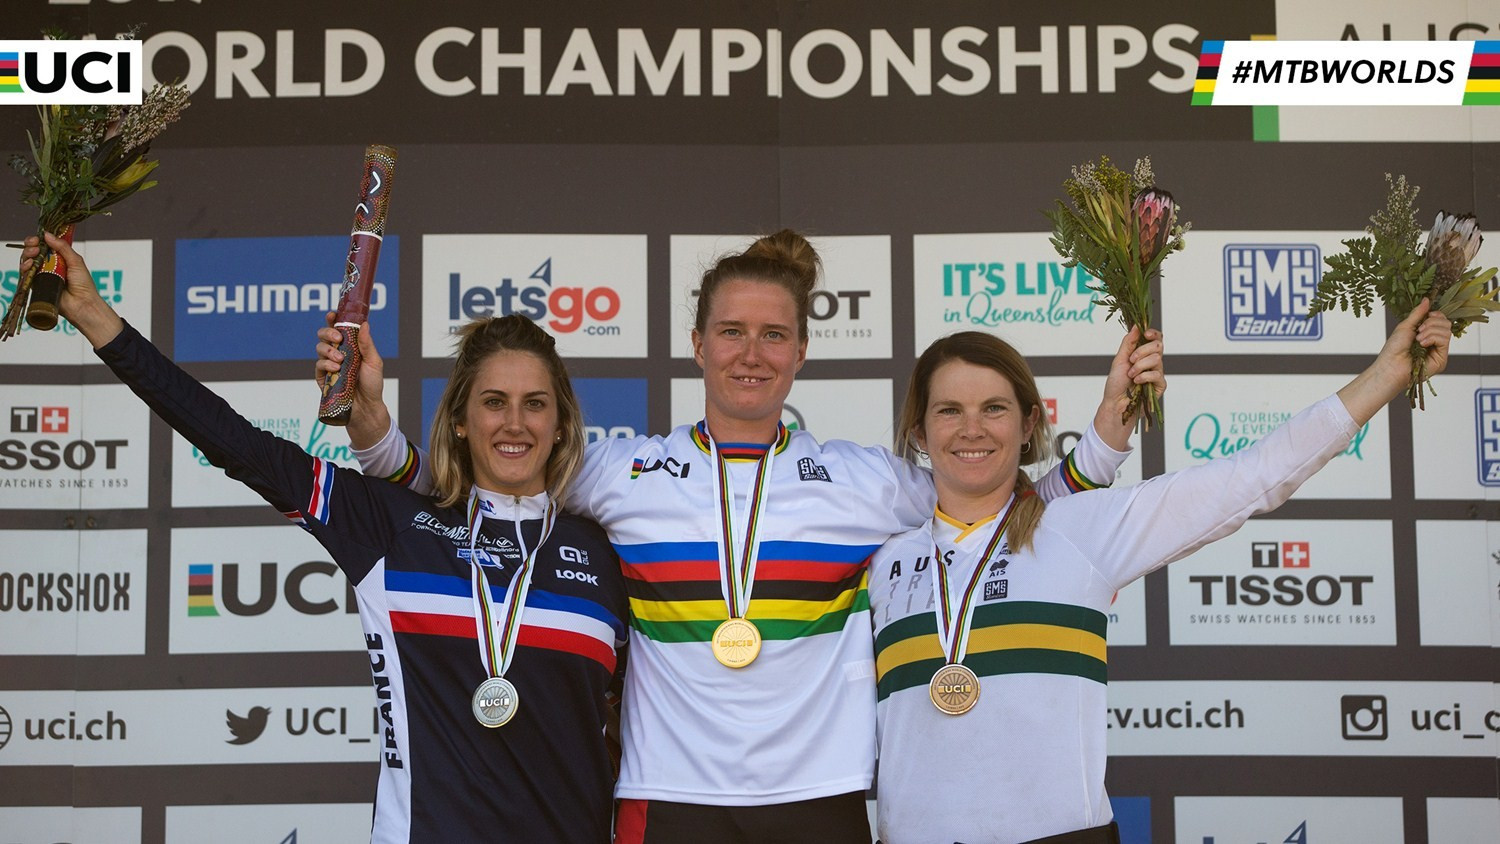 Miller and Bruni secured downhill titles as UCI Mountain Bike World Championships conclude